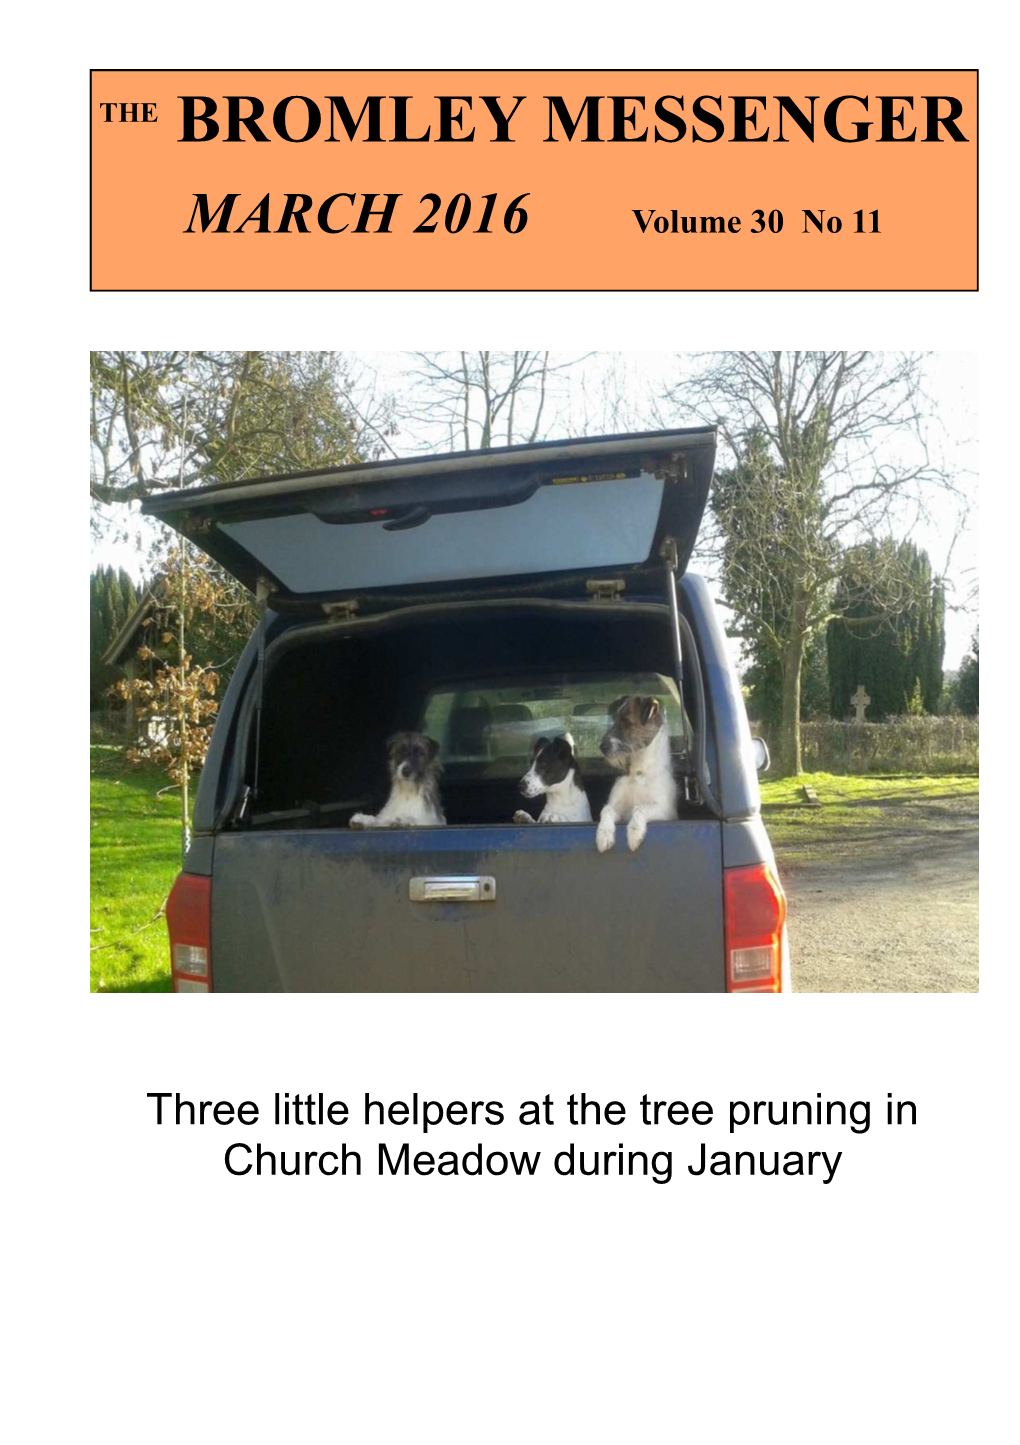 The Bromley Messenger March 2016